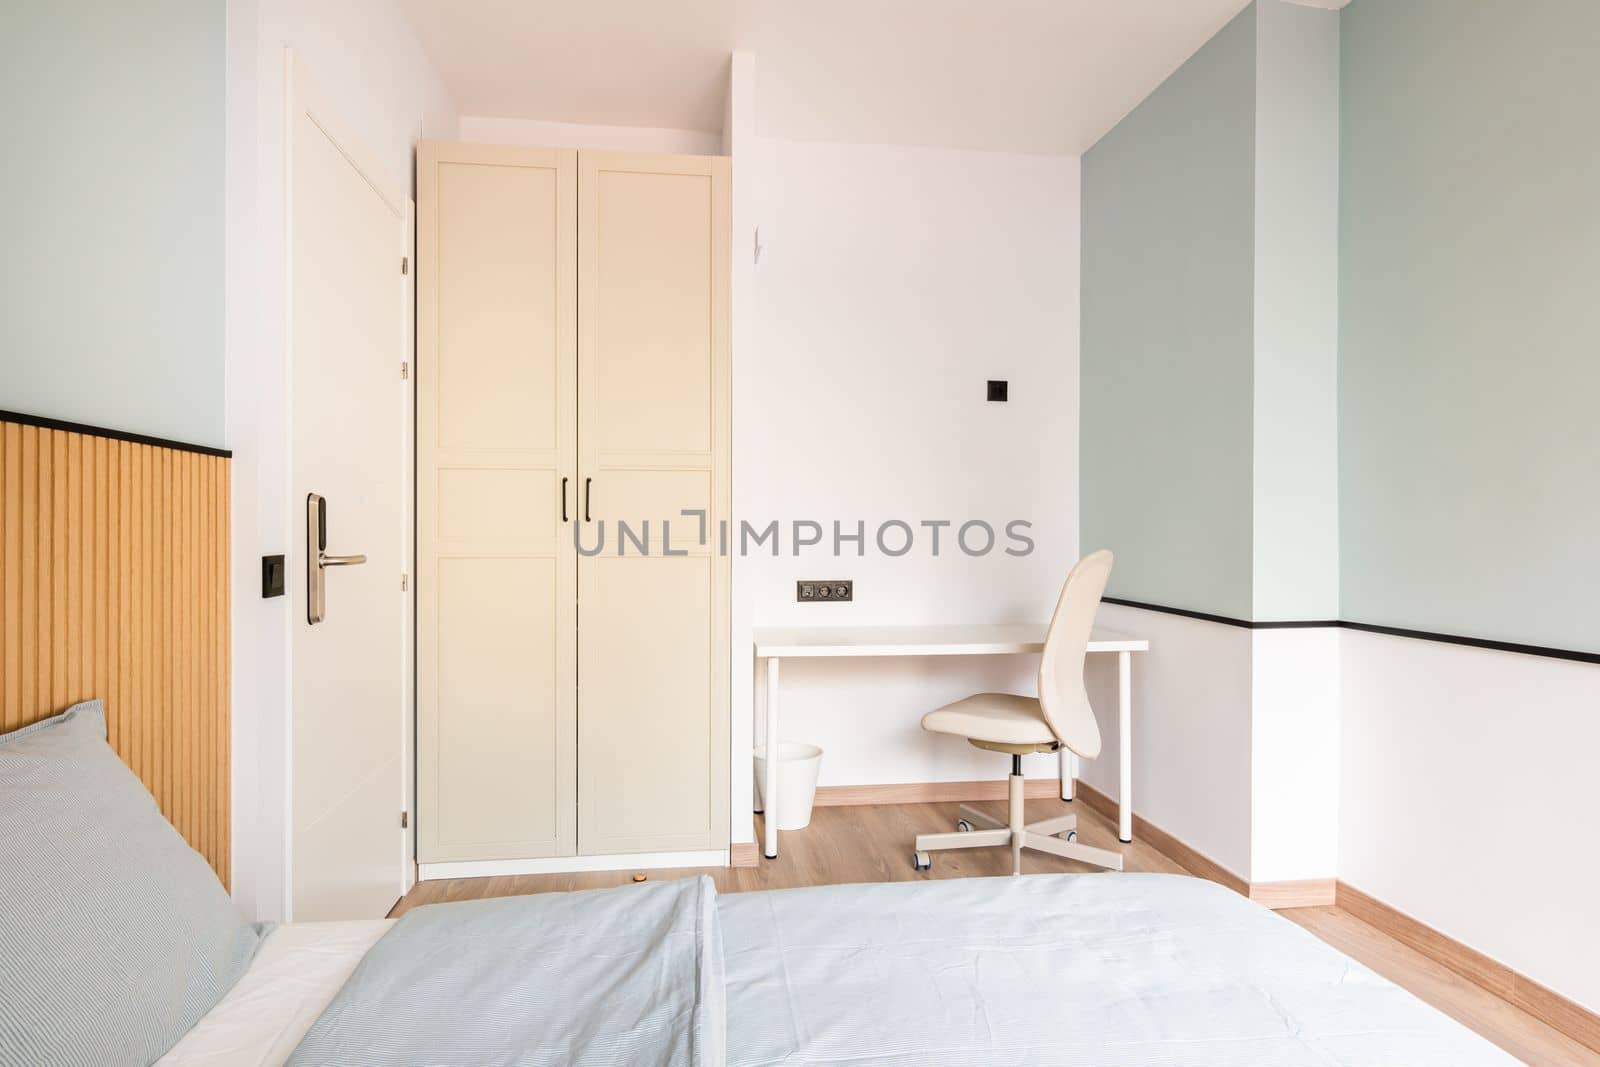 A bright room with walls in a soft mint color, a bed for two people, a work area with a table and a chair, a wardrobe with beige wooden doors. Door with electronic combination lock. by apavlin